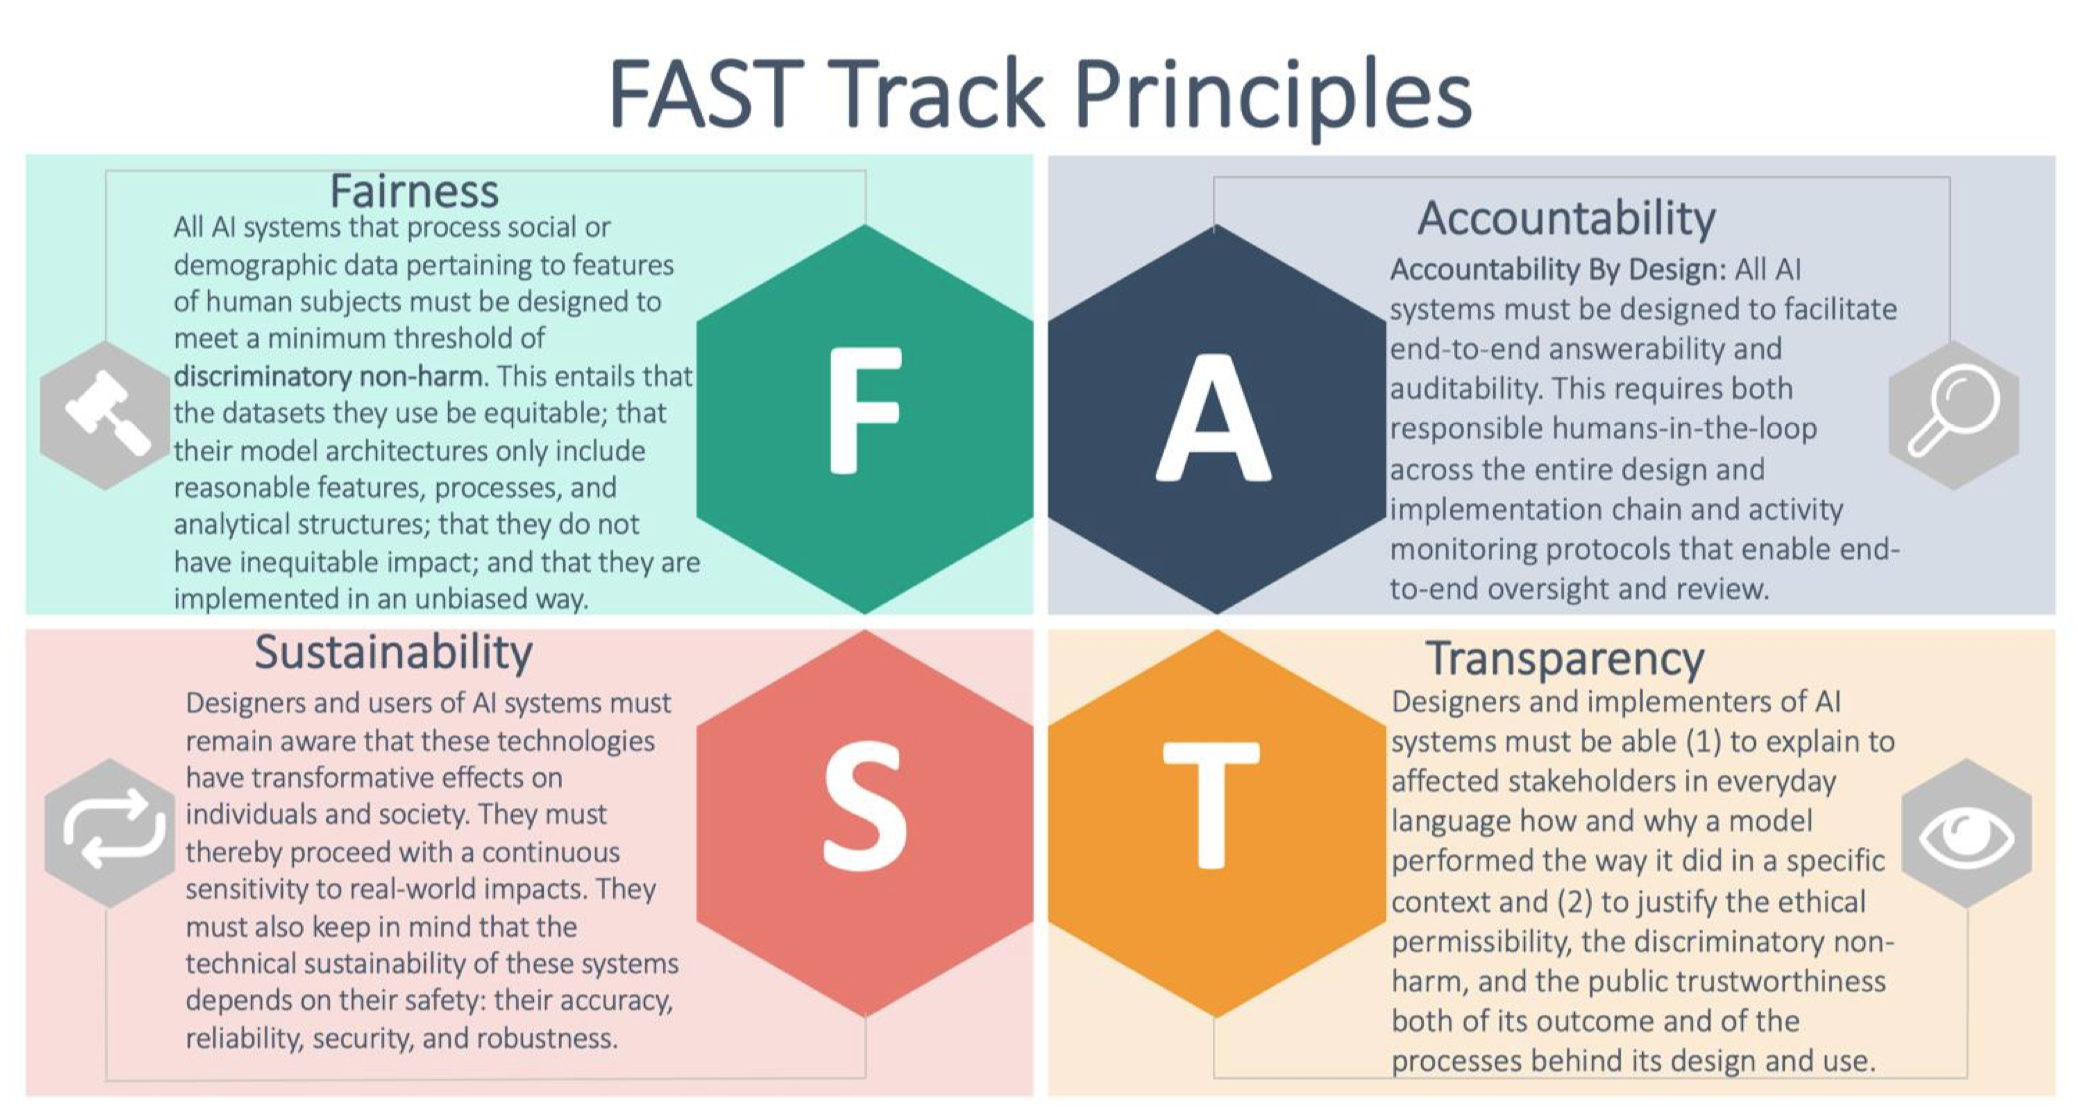 The Alan Turing Institute's FAST framework outlines the four key principles of ethical innovation in artificial intelligence, including fairness, accountability, sustainability, and transparency.